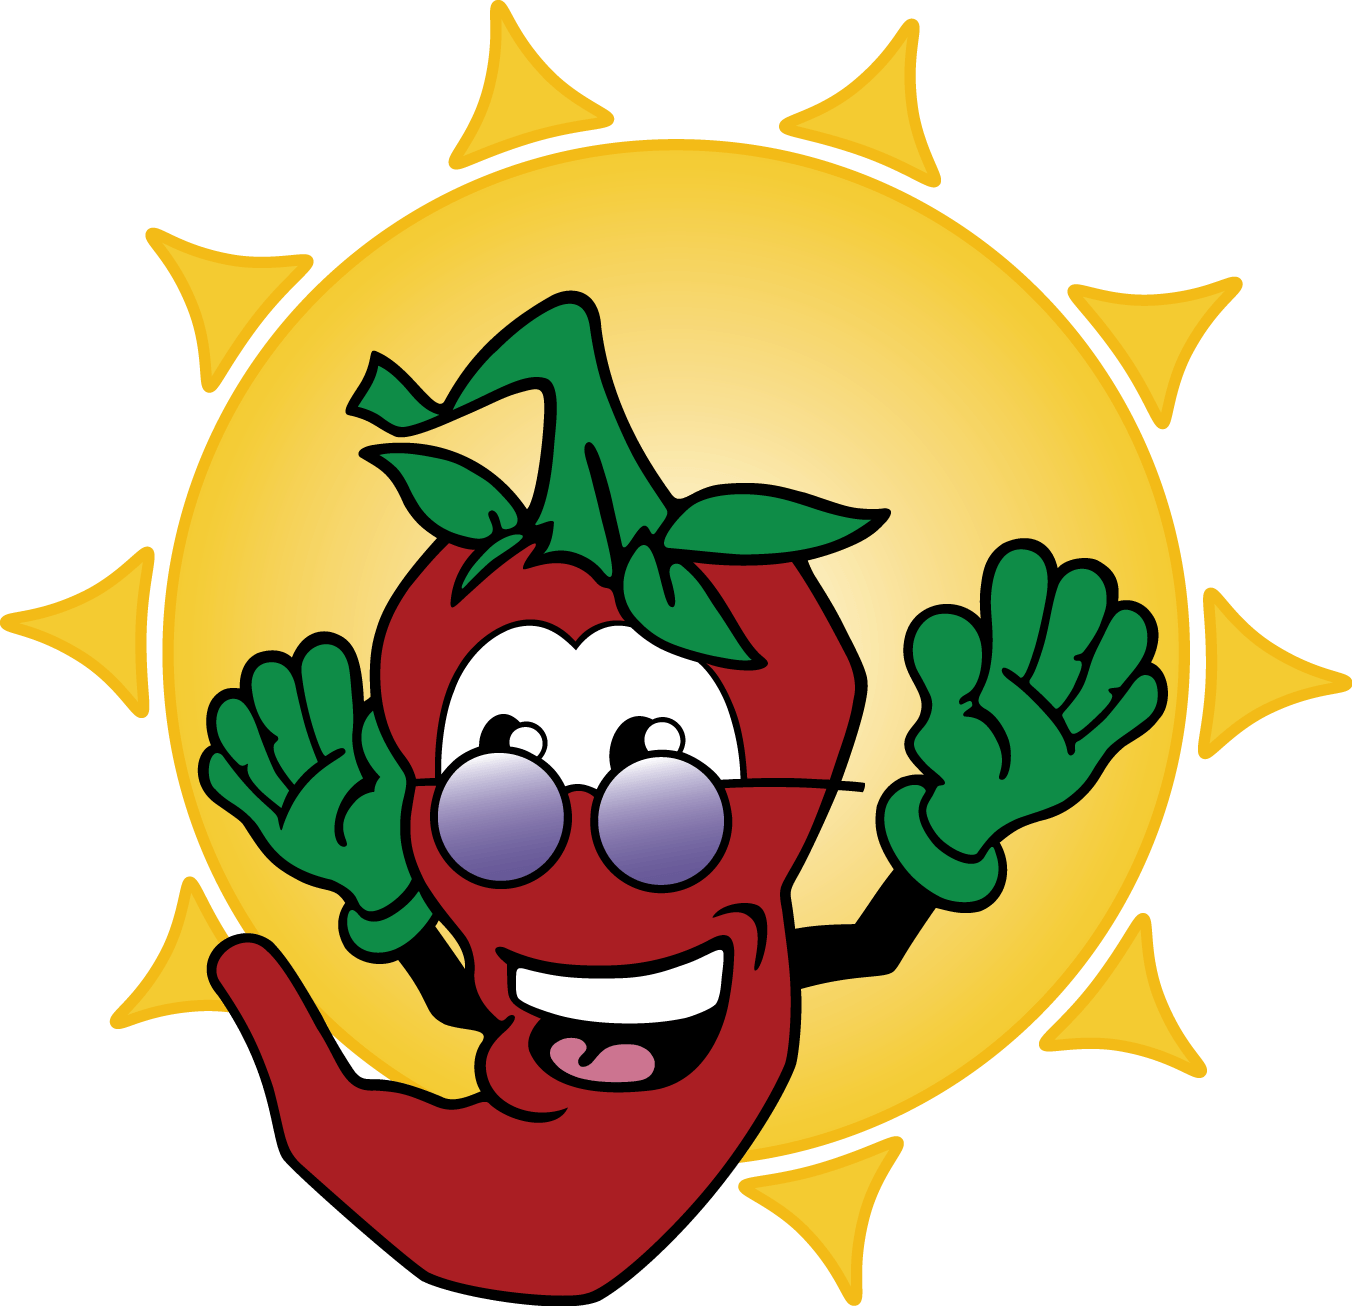 Chile Pepper Logo - WELCOME TO Chili Peppers Tanning – HOTTEST BULBS!!! HOTTEST DEALS ...